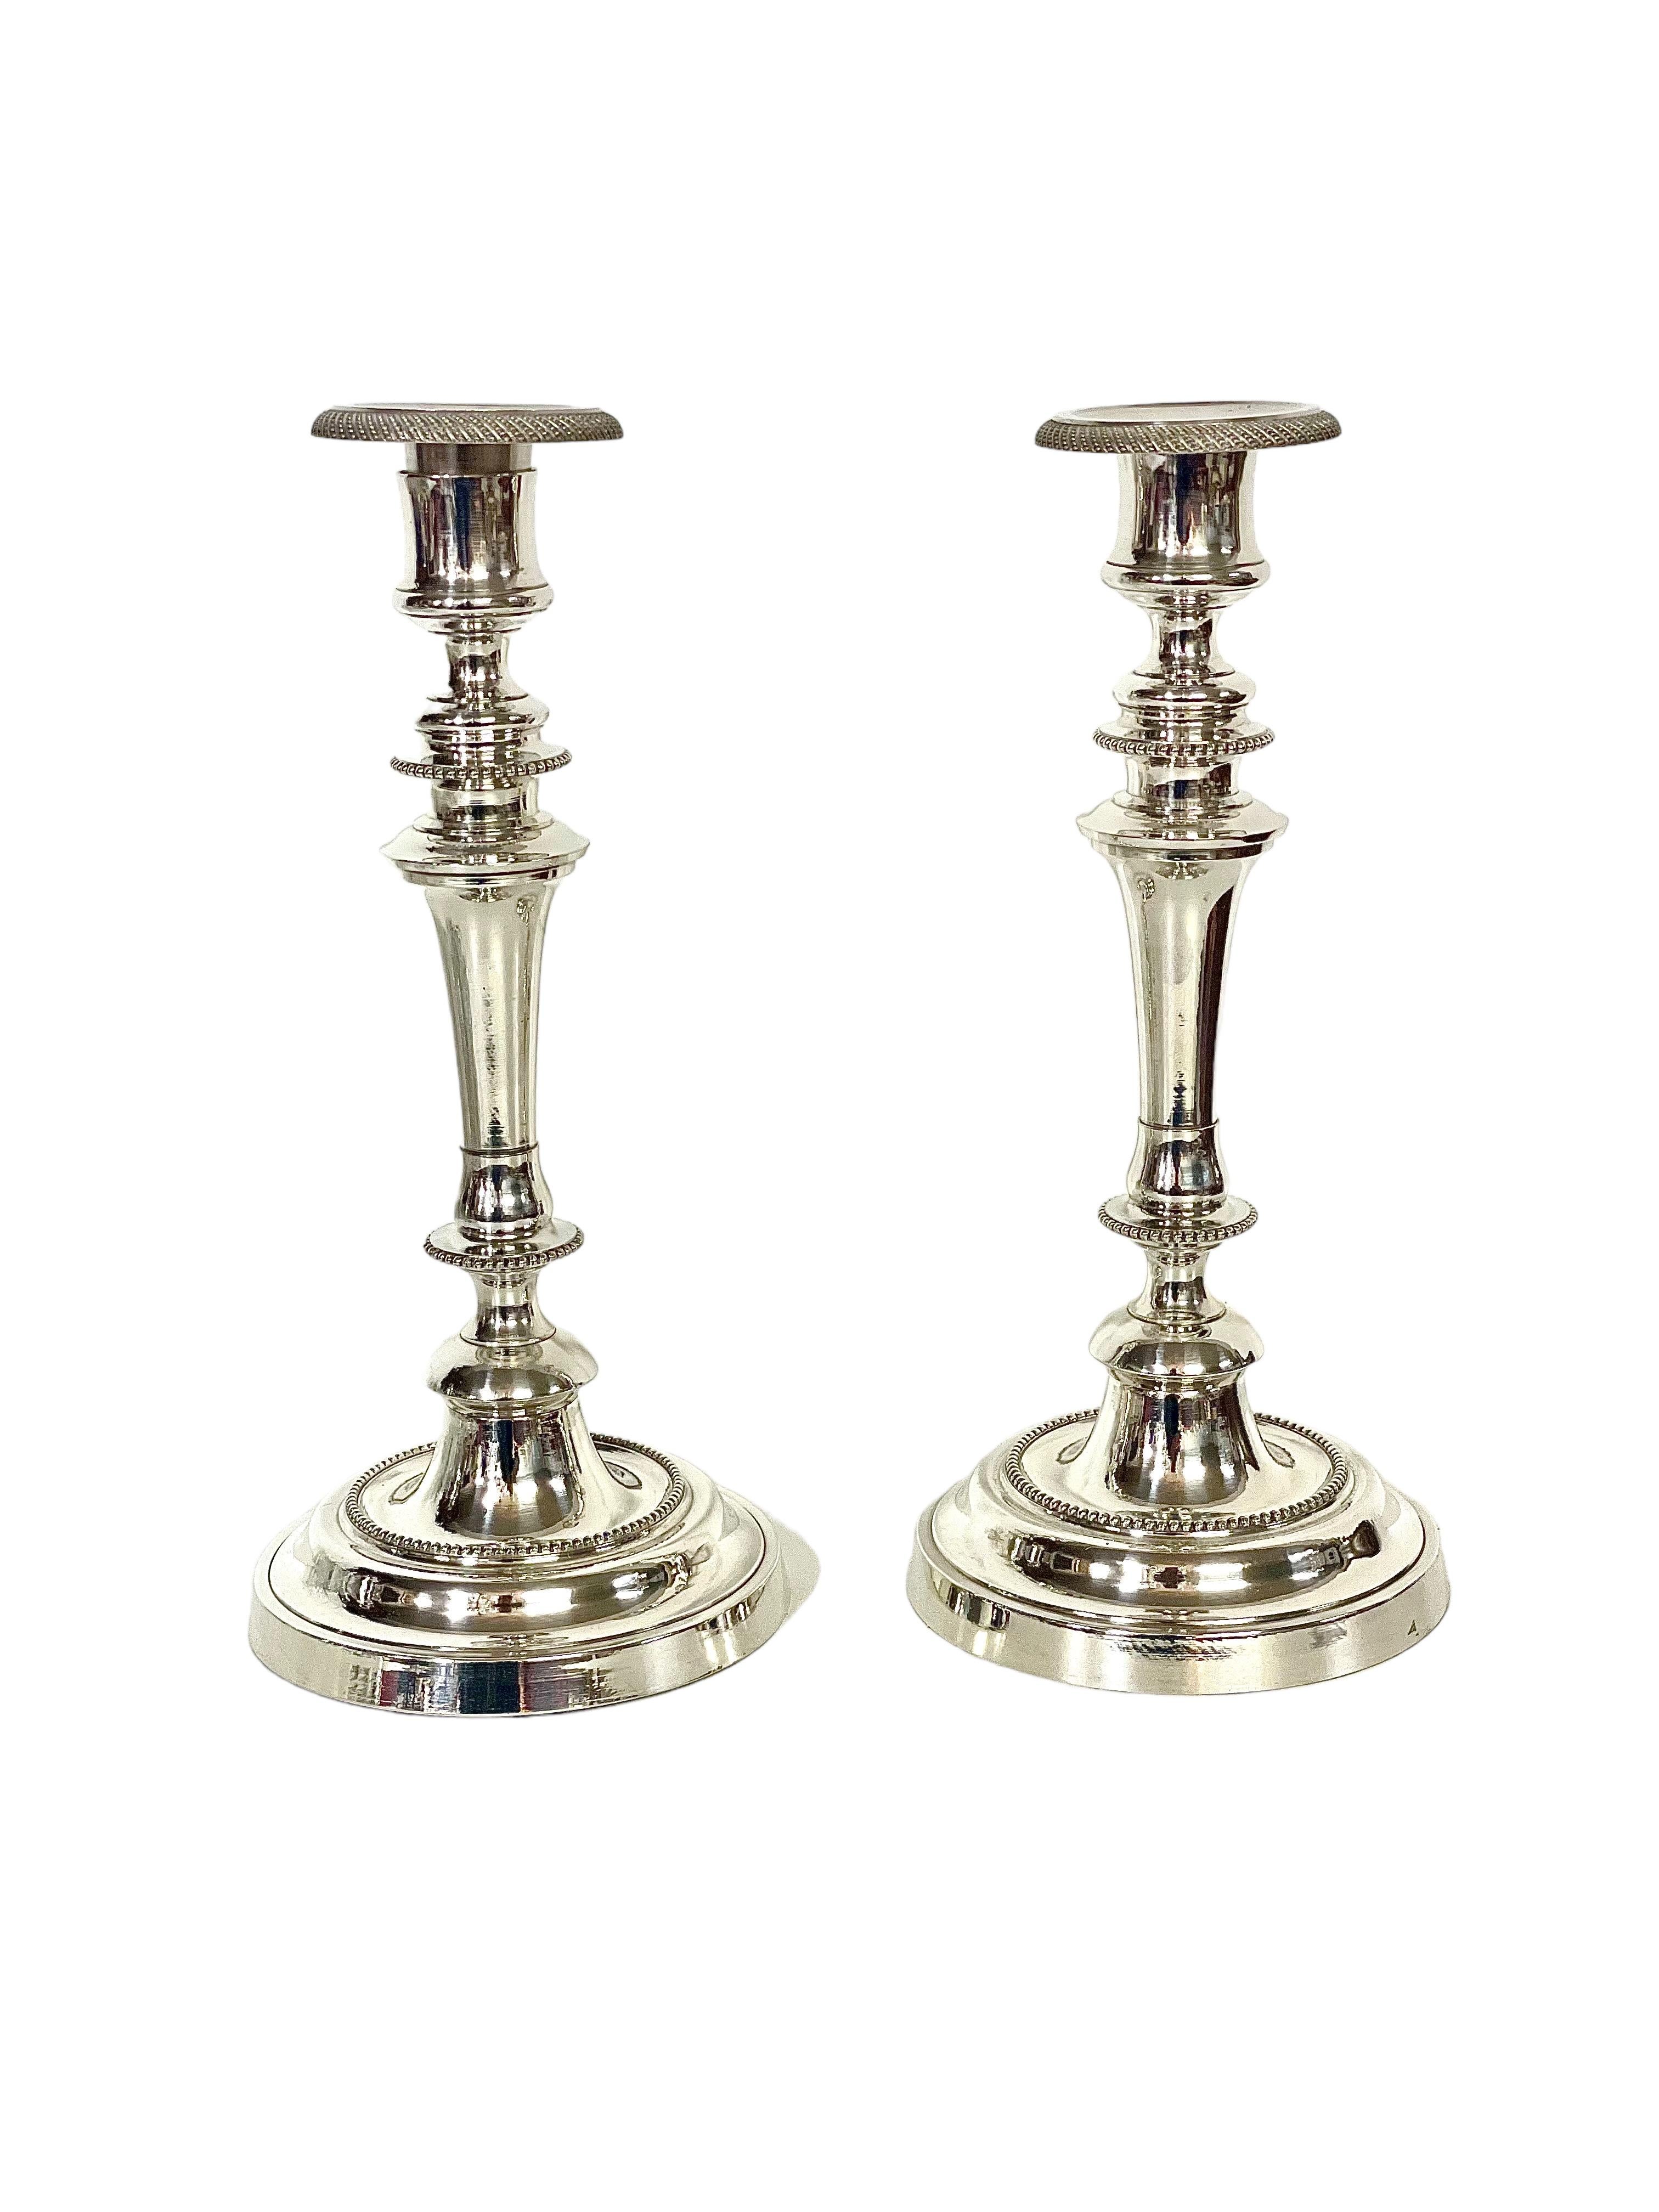 19th Century Louis XVI Style Pair of Silver Plated and Crystal Candle Holders by Morlot For Sale